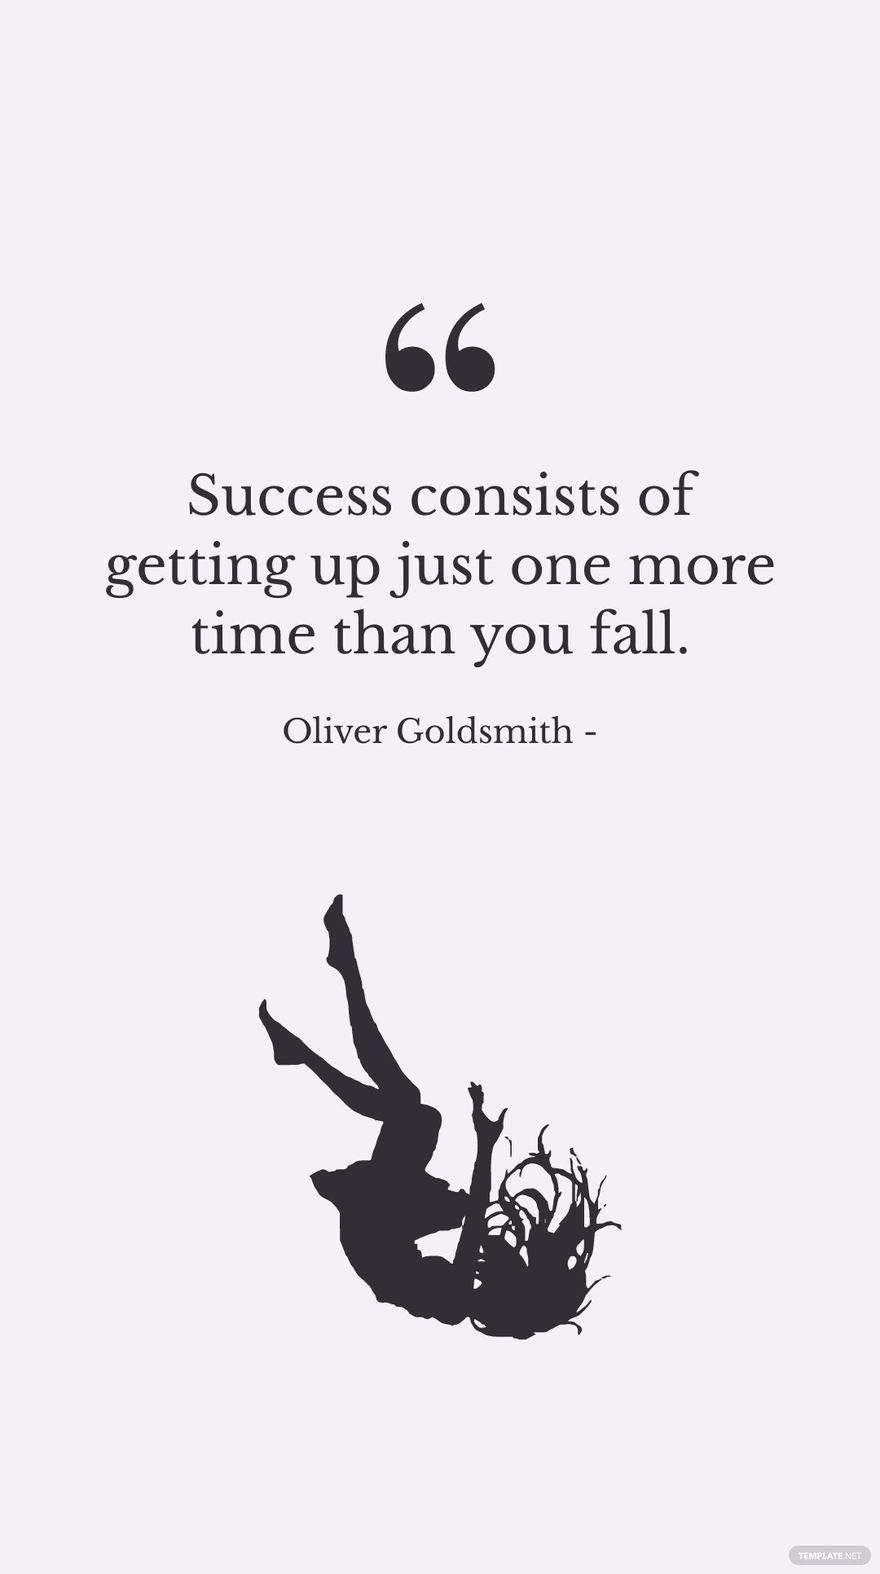 Oliver Goldsmith - Success consists of getting up just one more time than you fall.